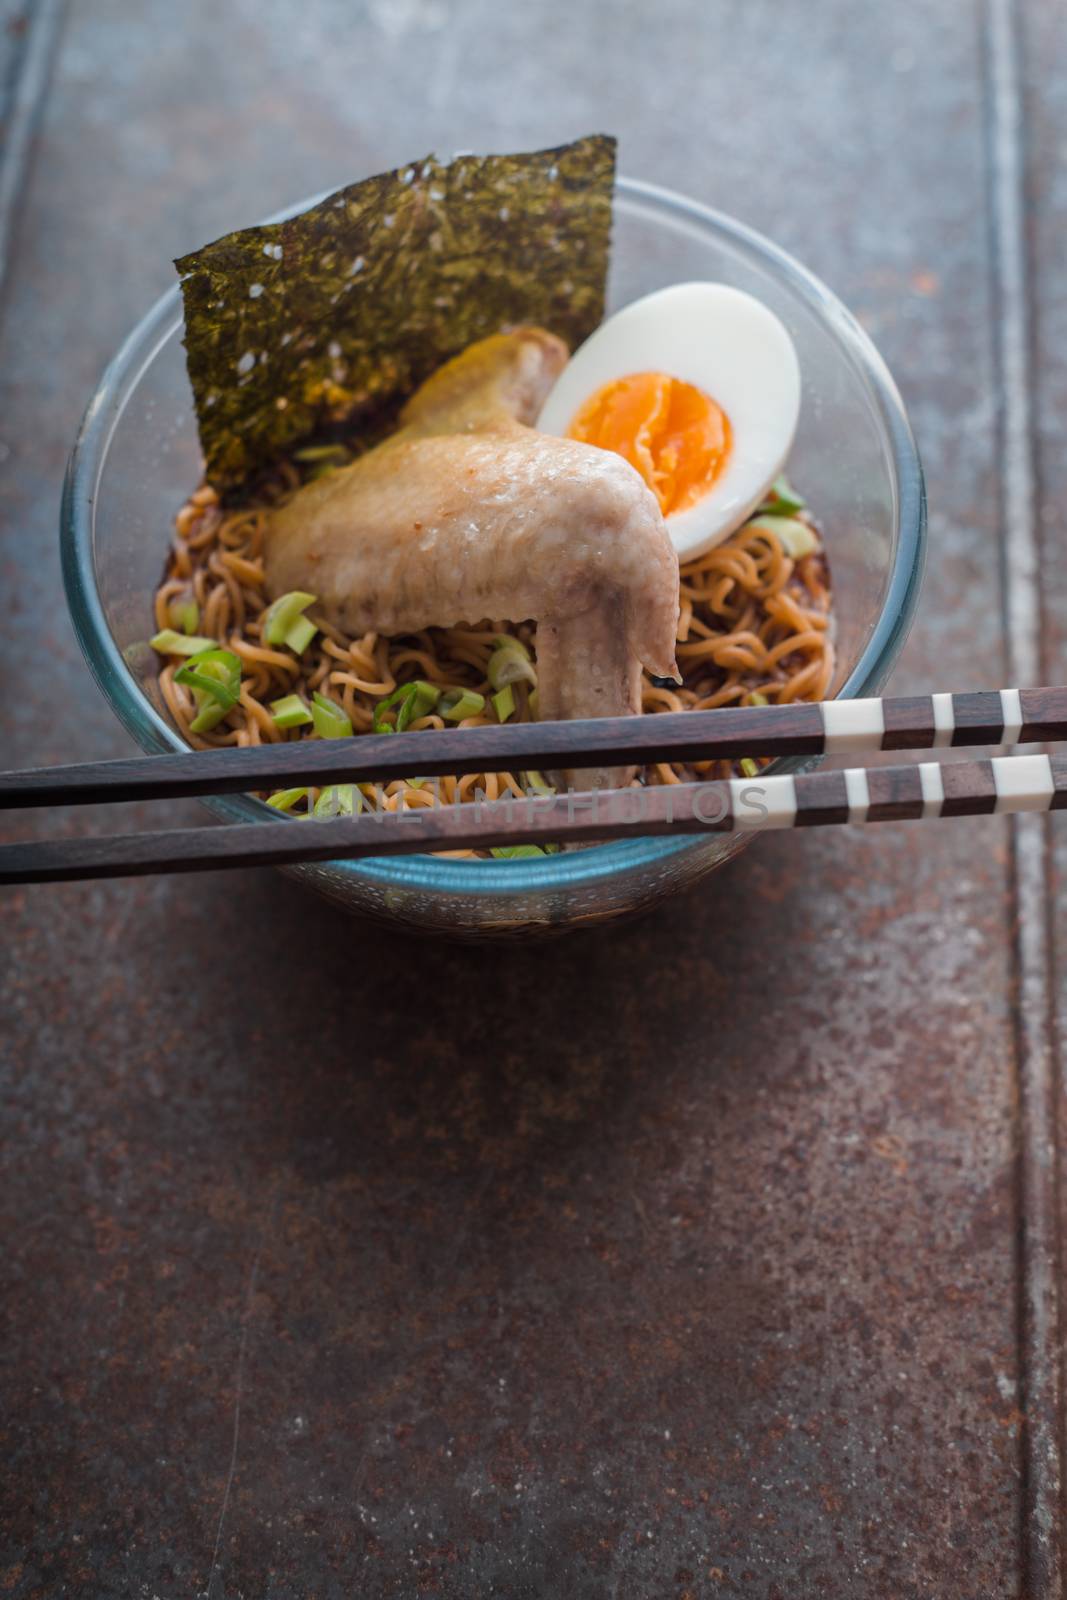 Soup Ramen noodle with chicken wing and egg by Deniskarpenkov